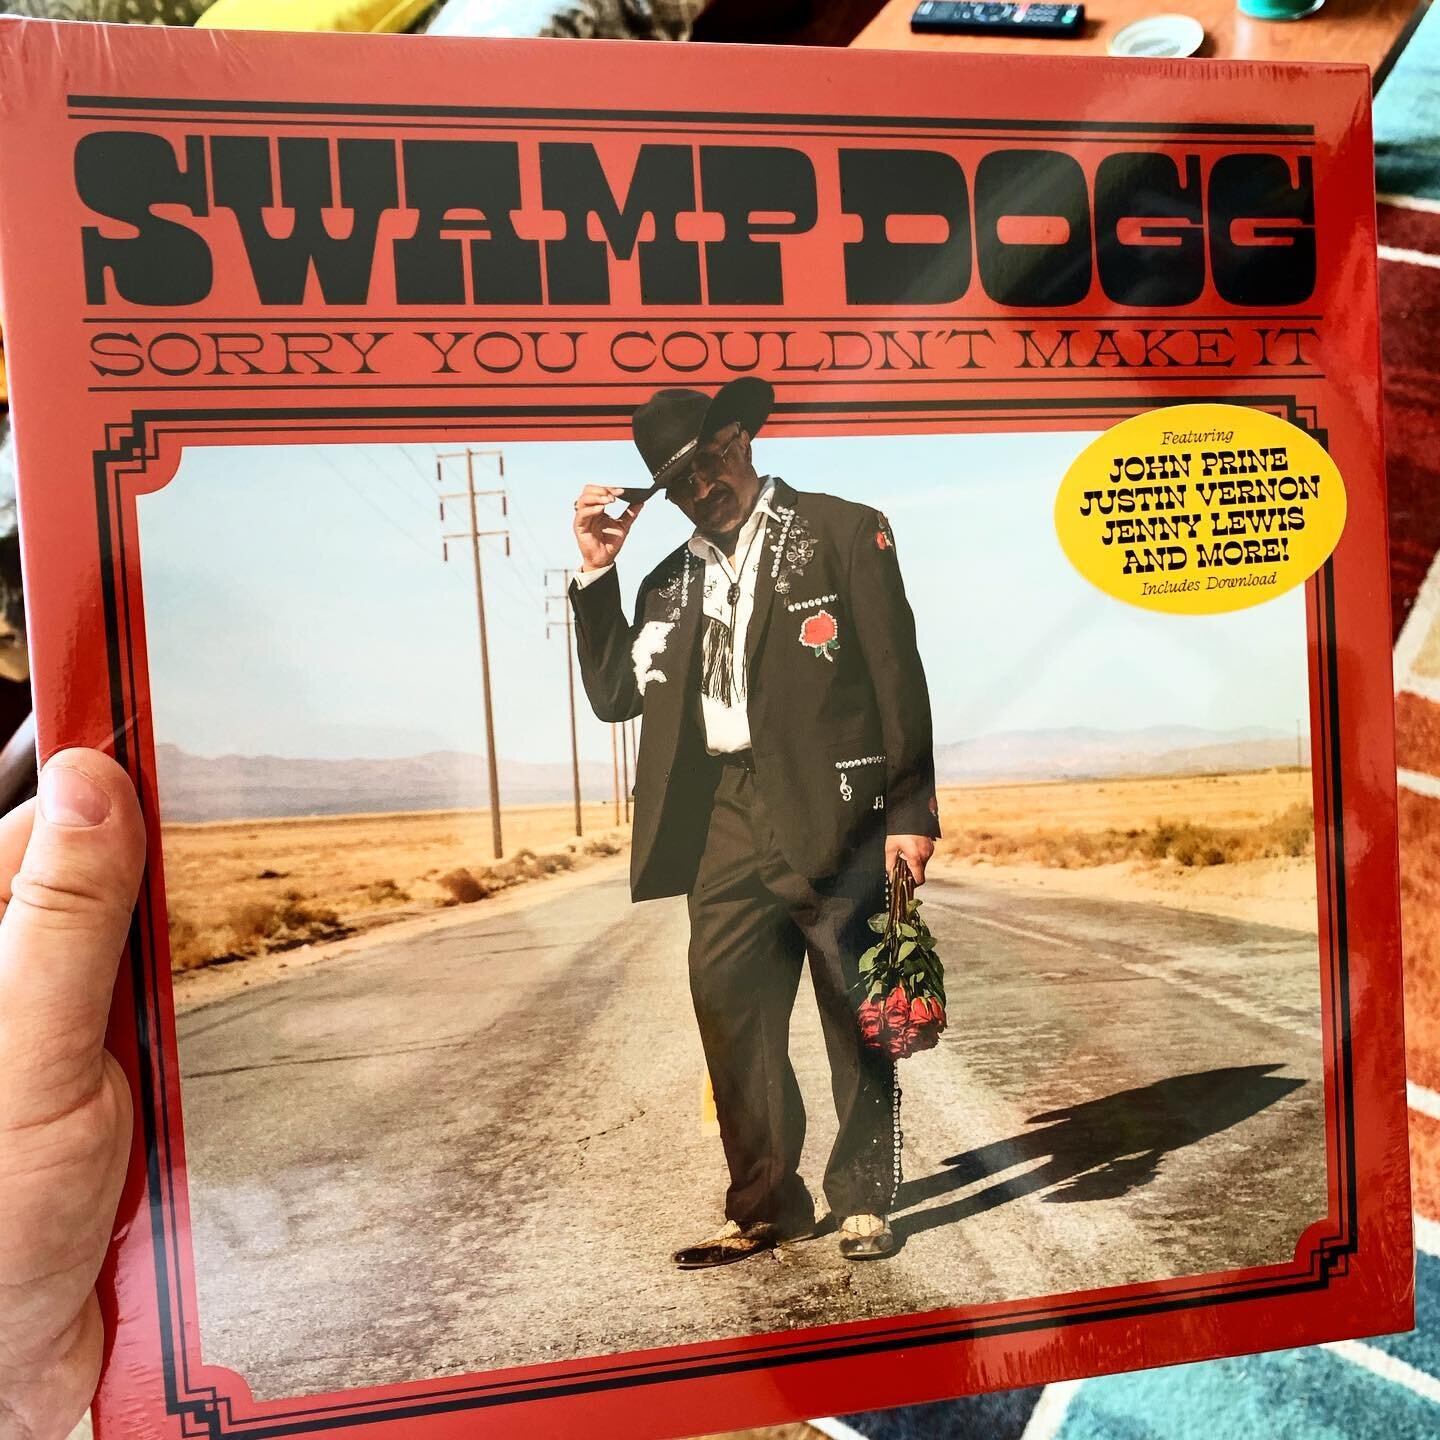 Favorite record I&rsquo;ve hear in a while! Be on the lookout for this one to be featured in the next blog. What&rsquo;s spinning on your turntable today?

#swampdogg #jennylewis #justinvernon #boniver #soul #funk #vinyl #records #recordcollection #r